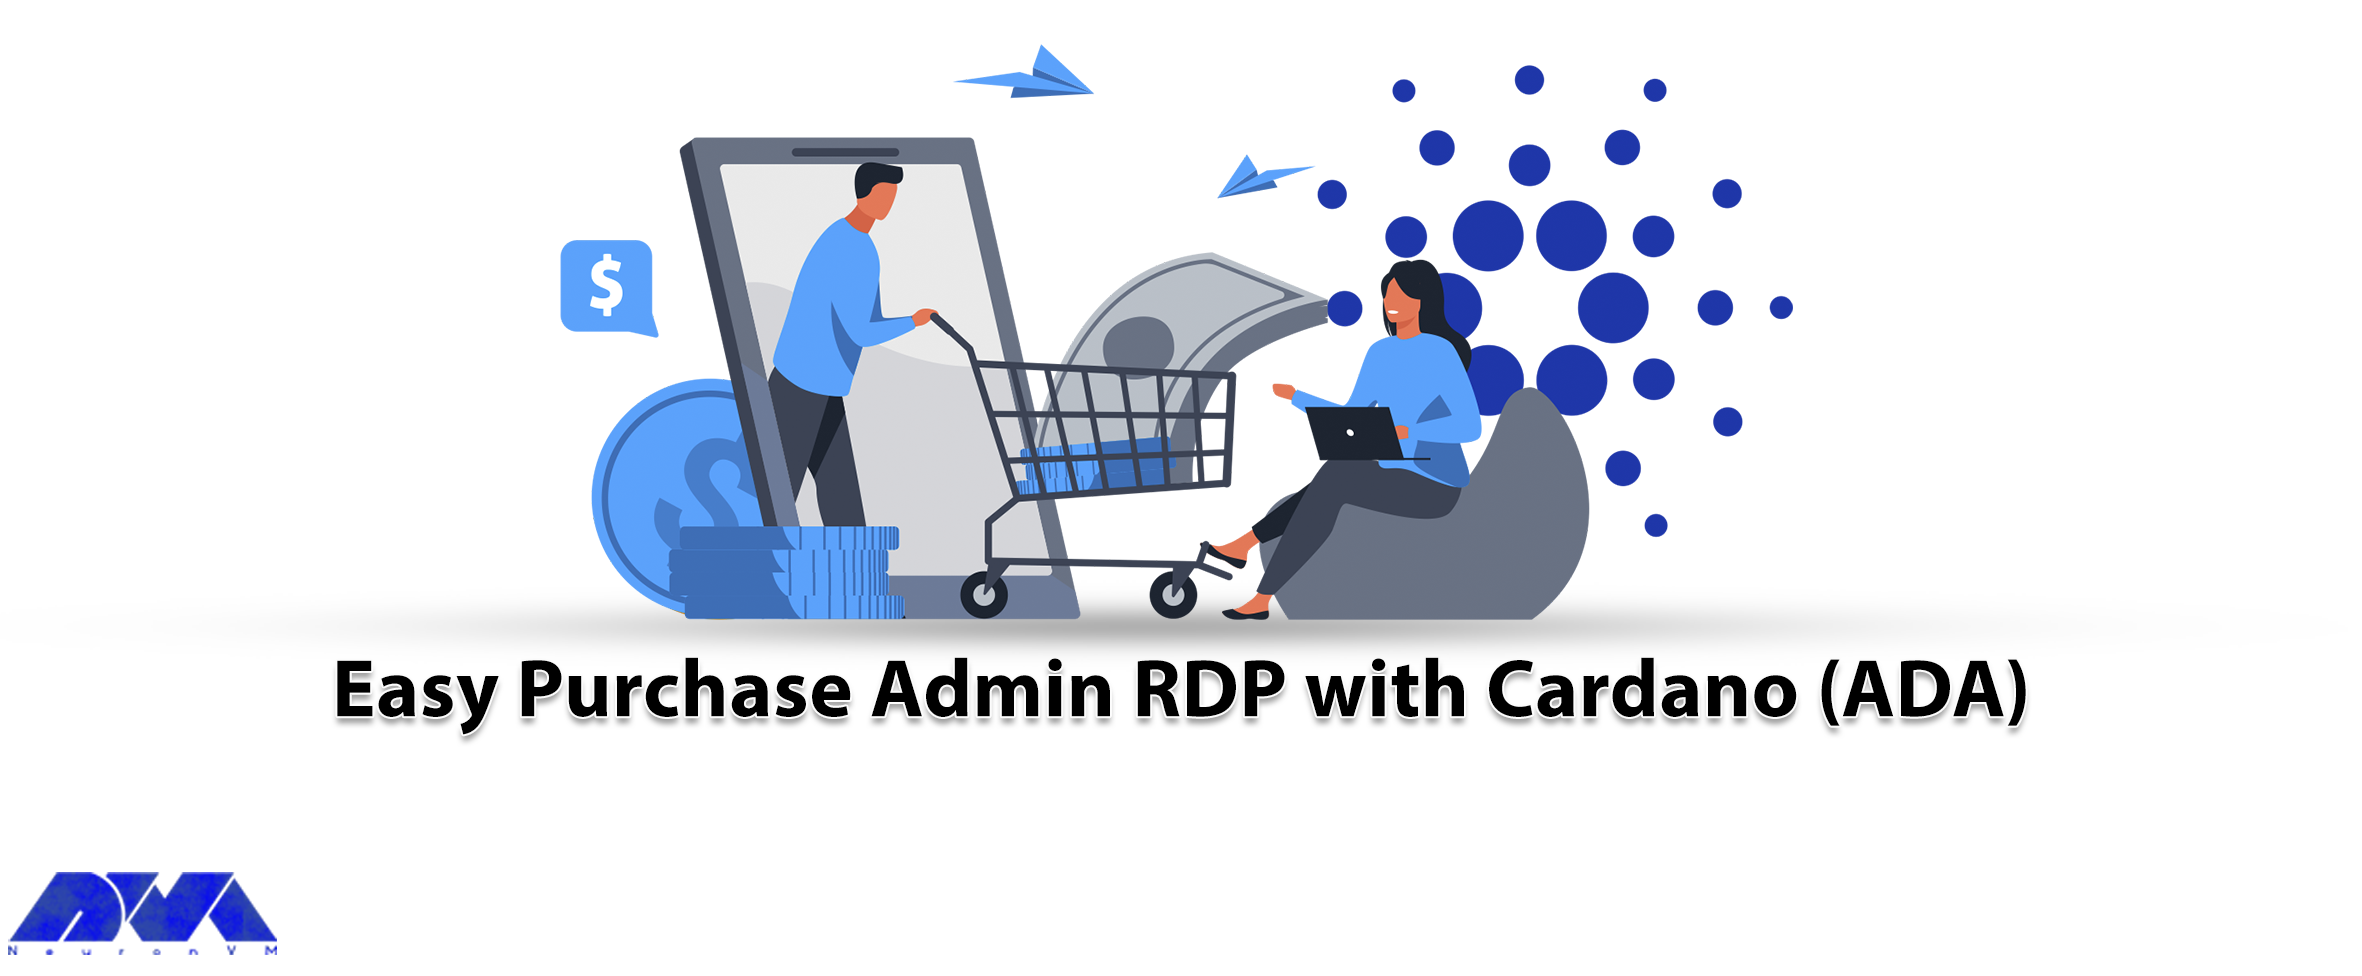 Easy Purchase Admin RDP with Cardano (ADA)